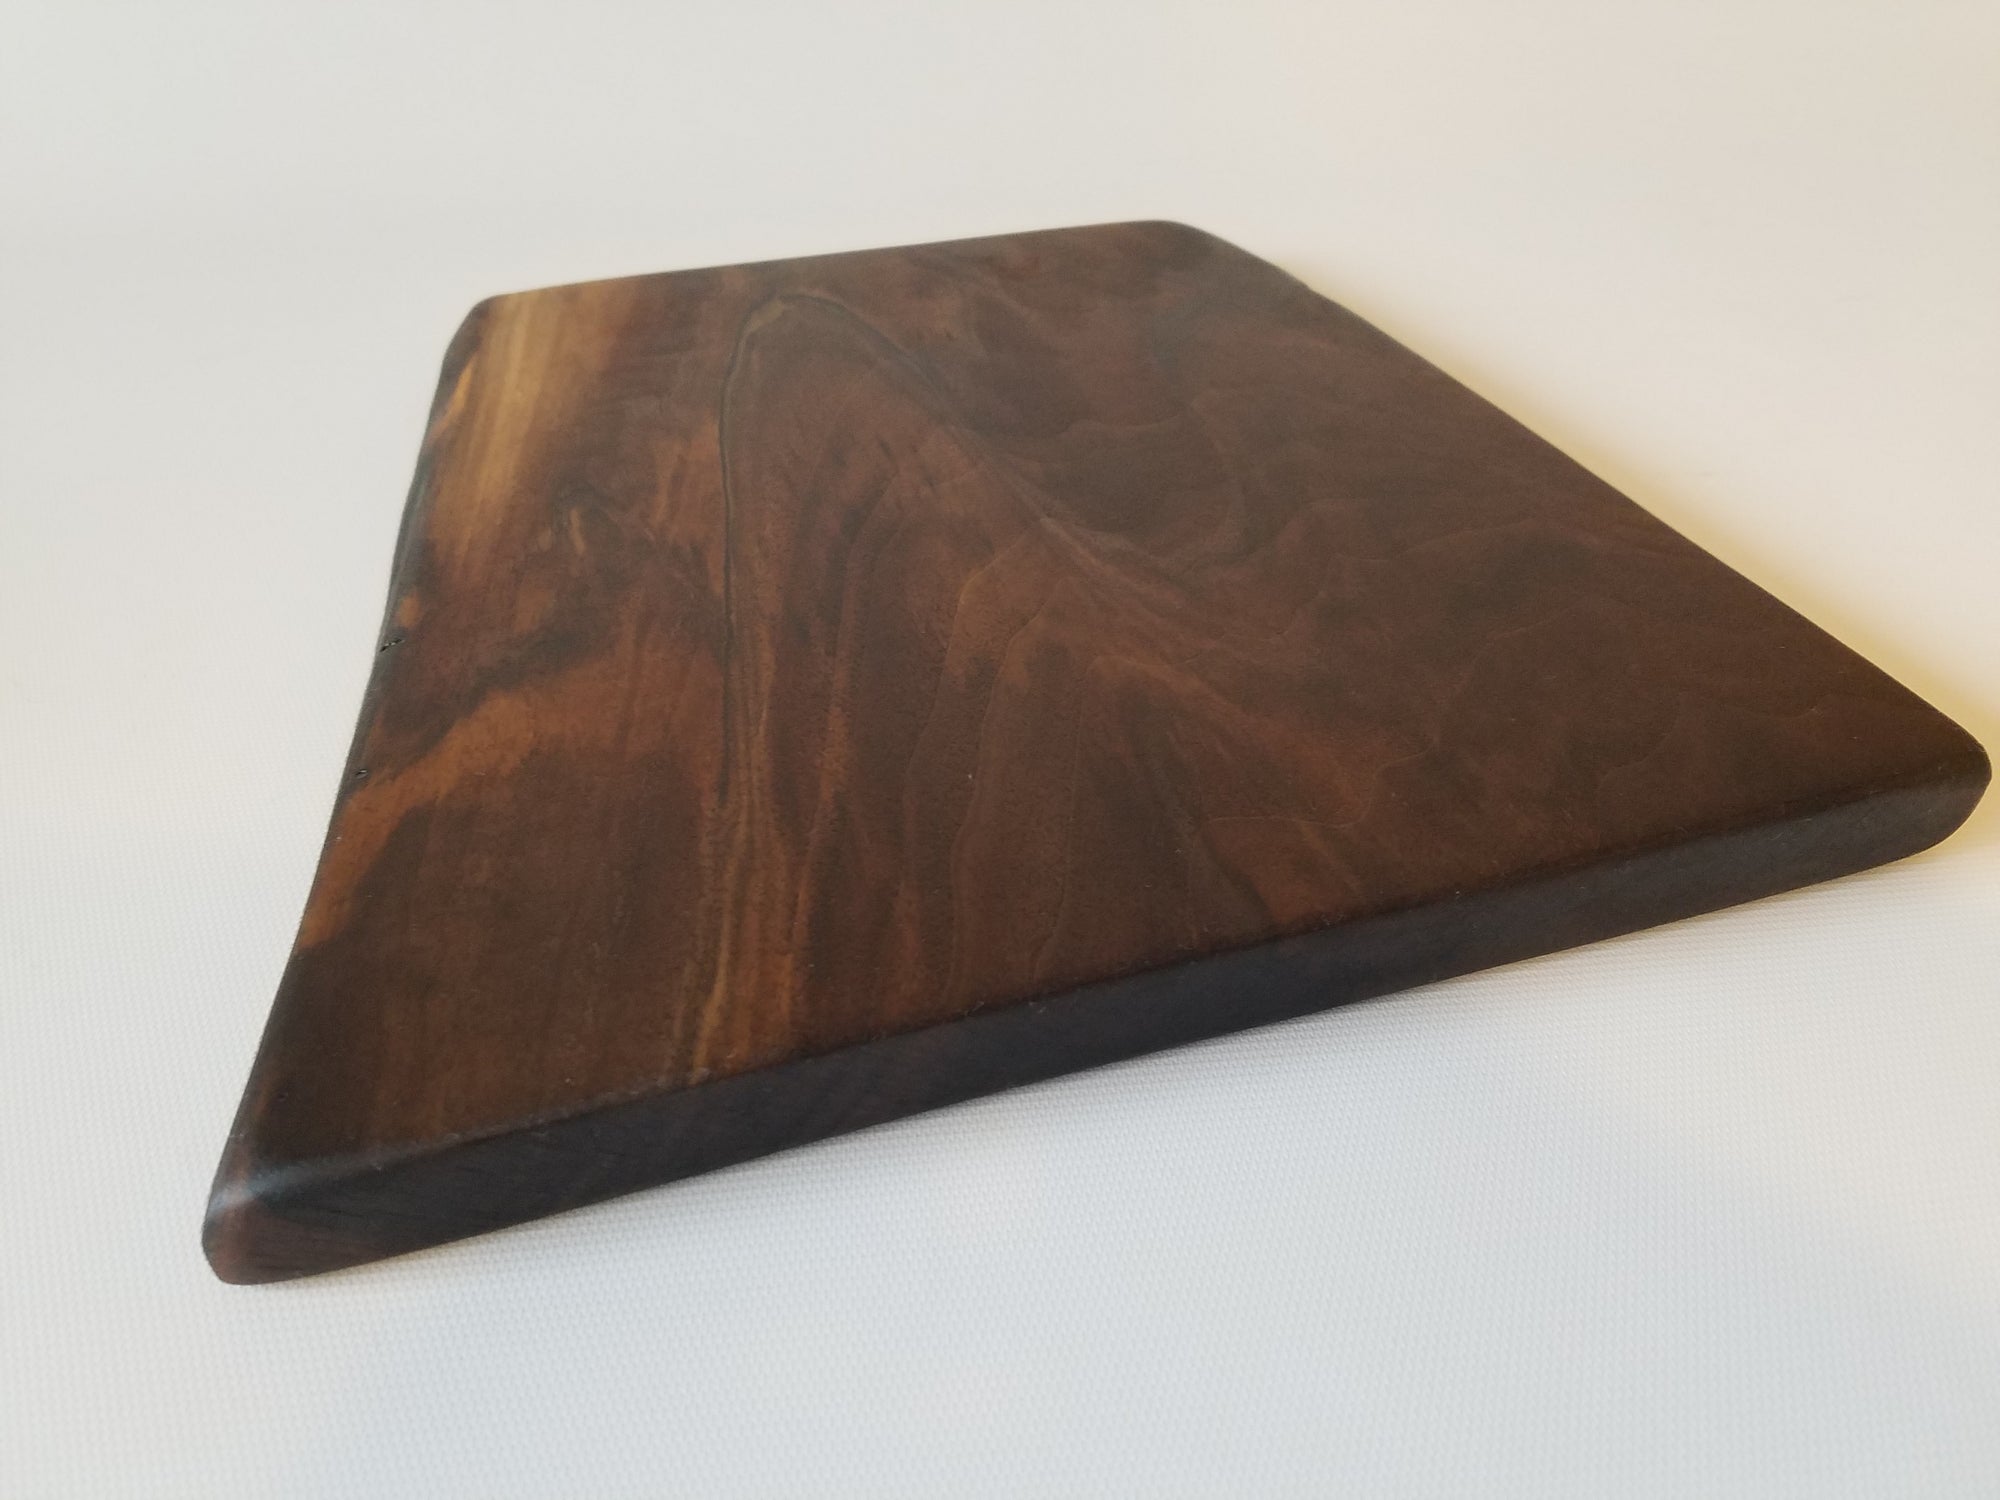 Walnut Charcuterie Board- Natural Wood- Serving Board- Food Server- Cutting Board- Party- Hostess- Table Decor- Gift- Foodie- Chef- Cooking